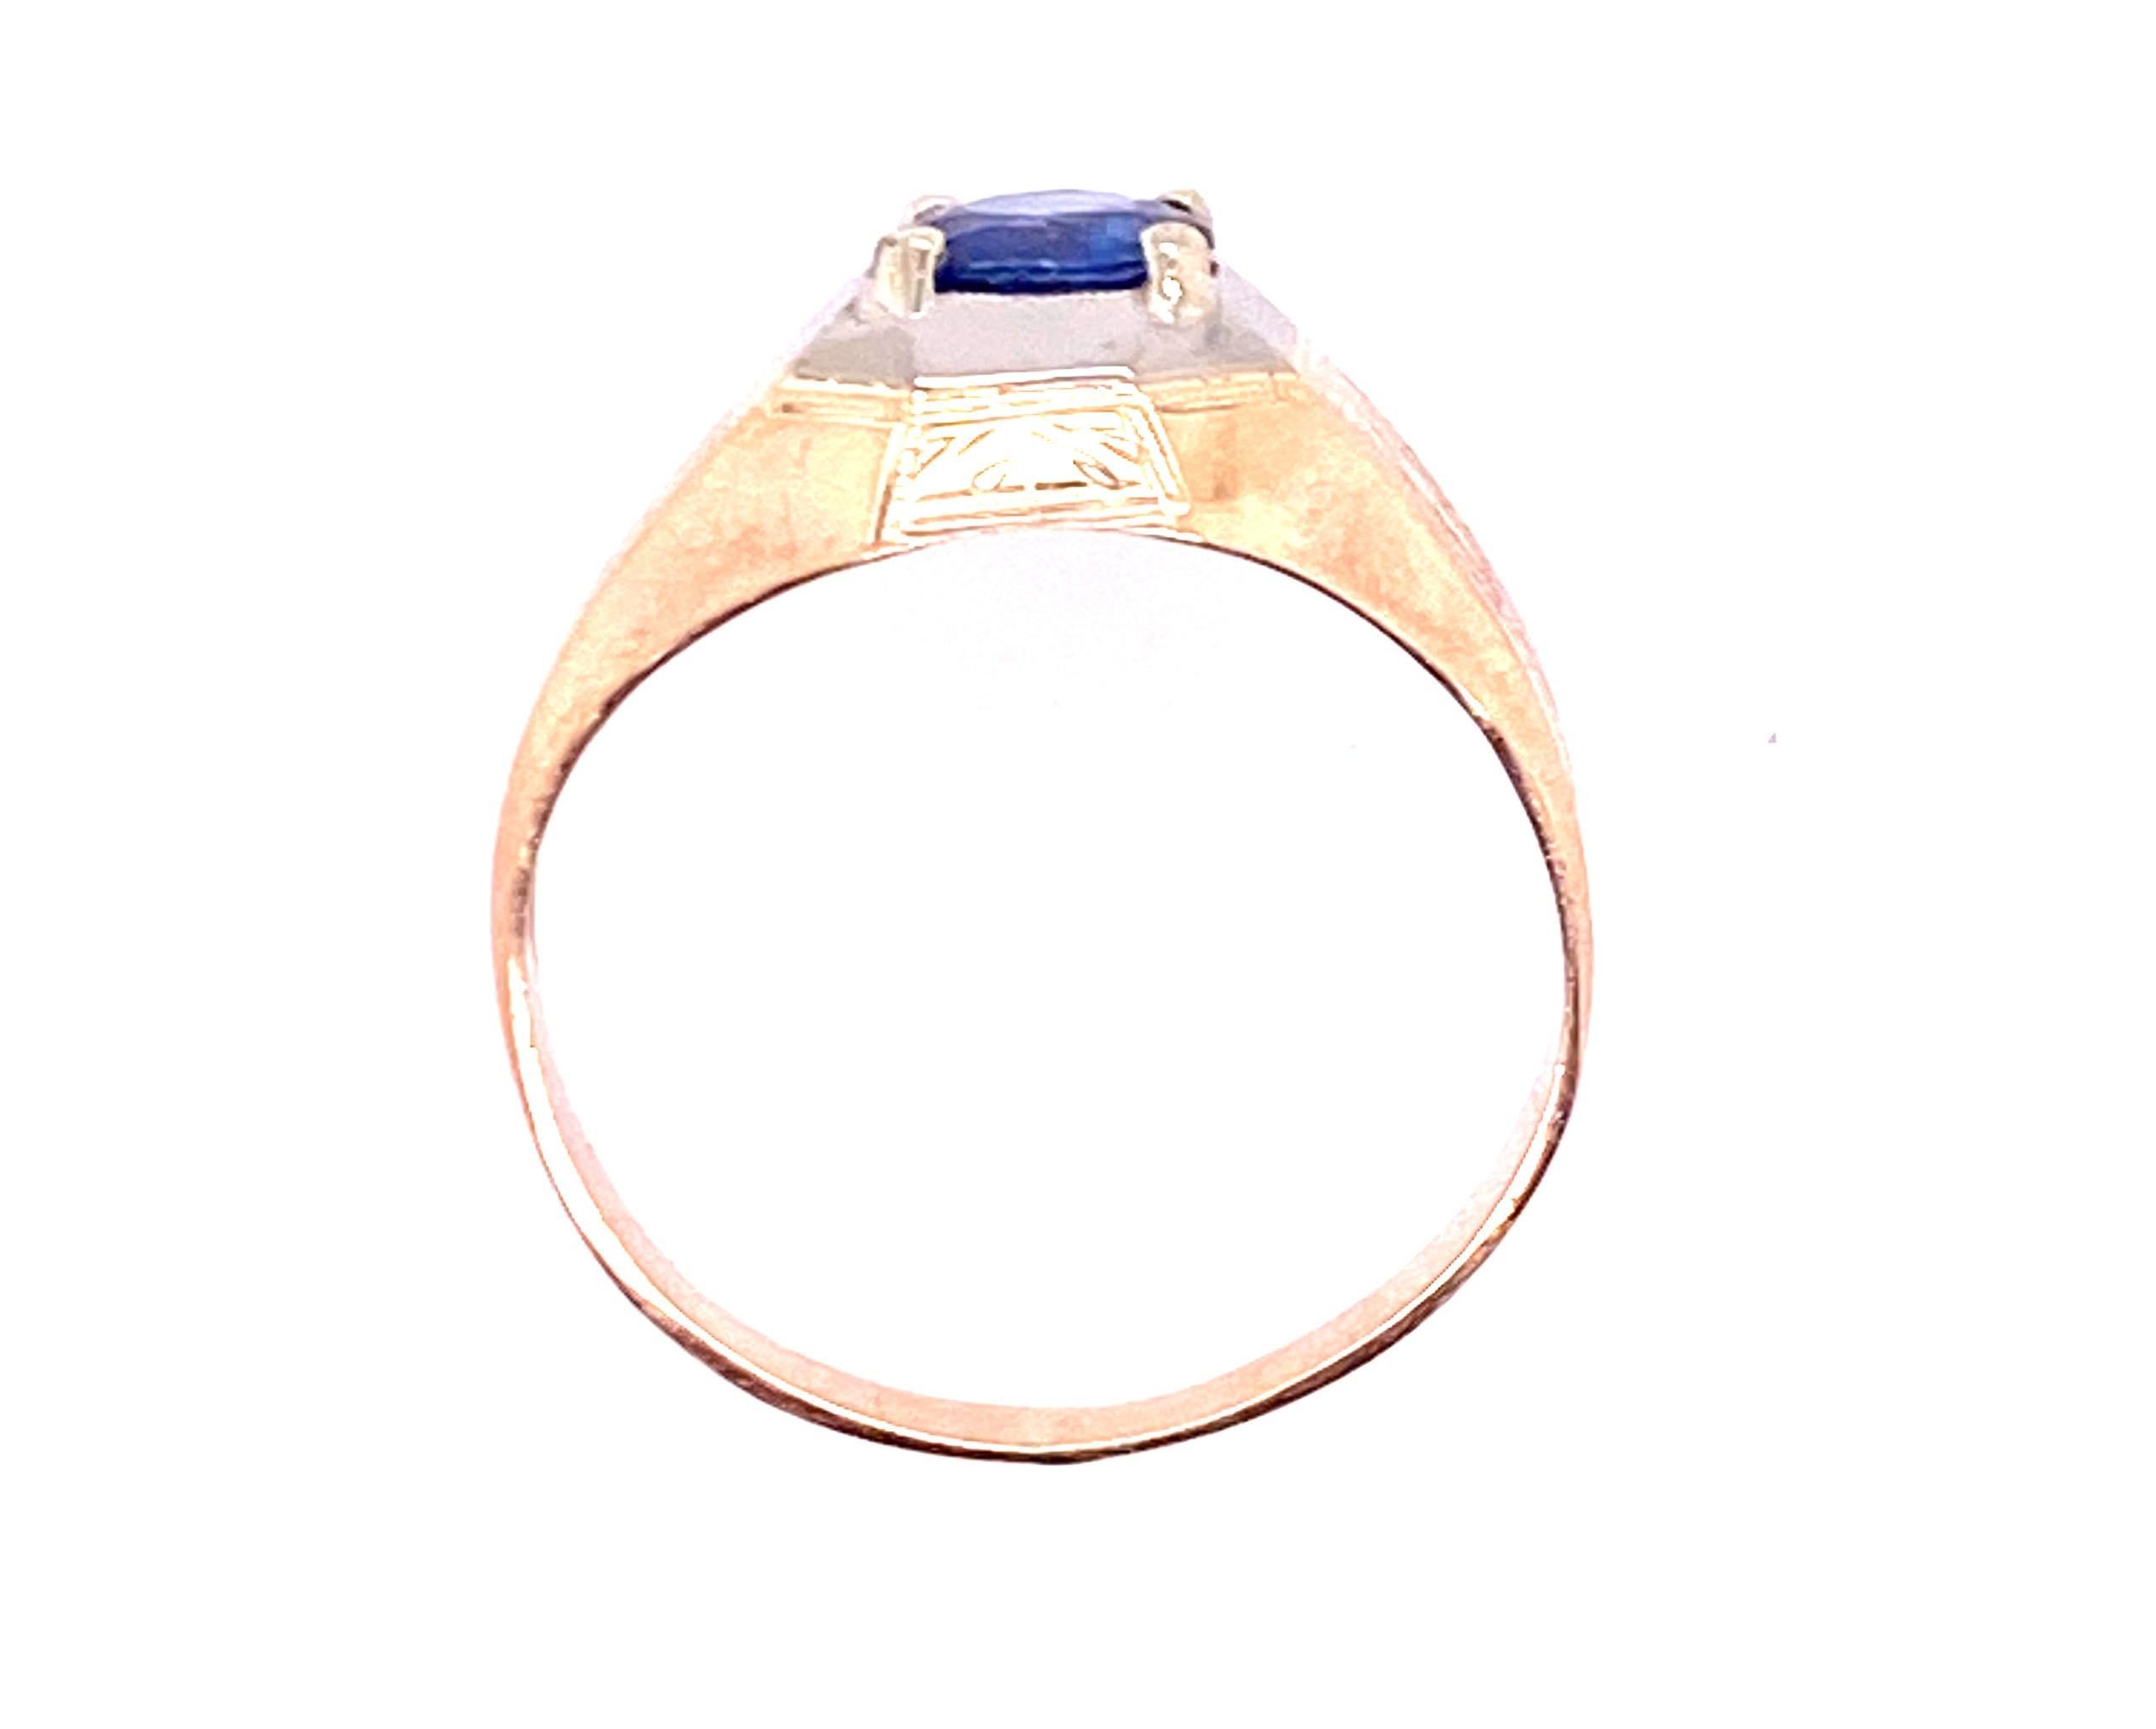 Genuine Original Art Deco Antique from 1920's-1930's Vintage Mens Sapphire Yellow Gold Ring



Featuring a Rich Royal Blue Natural Round Sapphire Gemstone

Perfect Engagement Ring for Antique Enthusiast 

Hand Pierced Details 

Art Deco Geometric